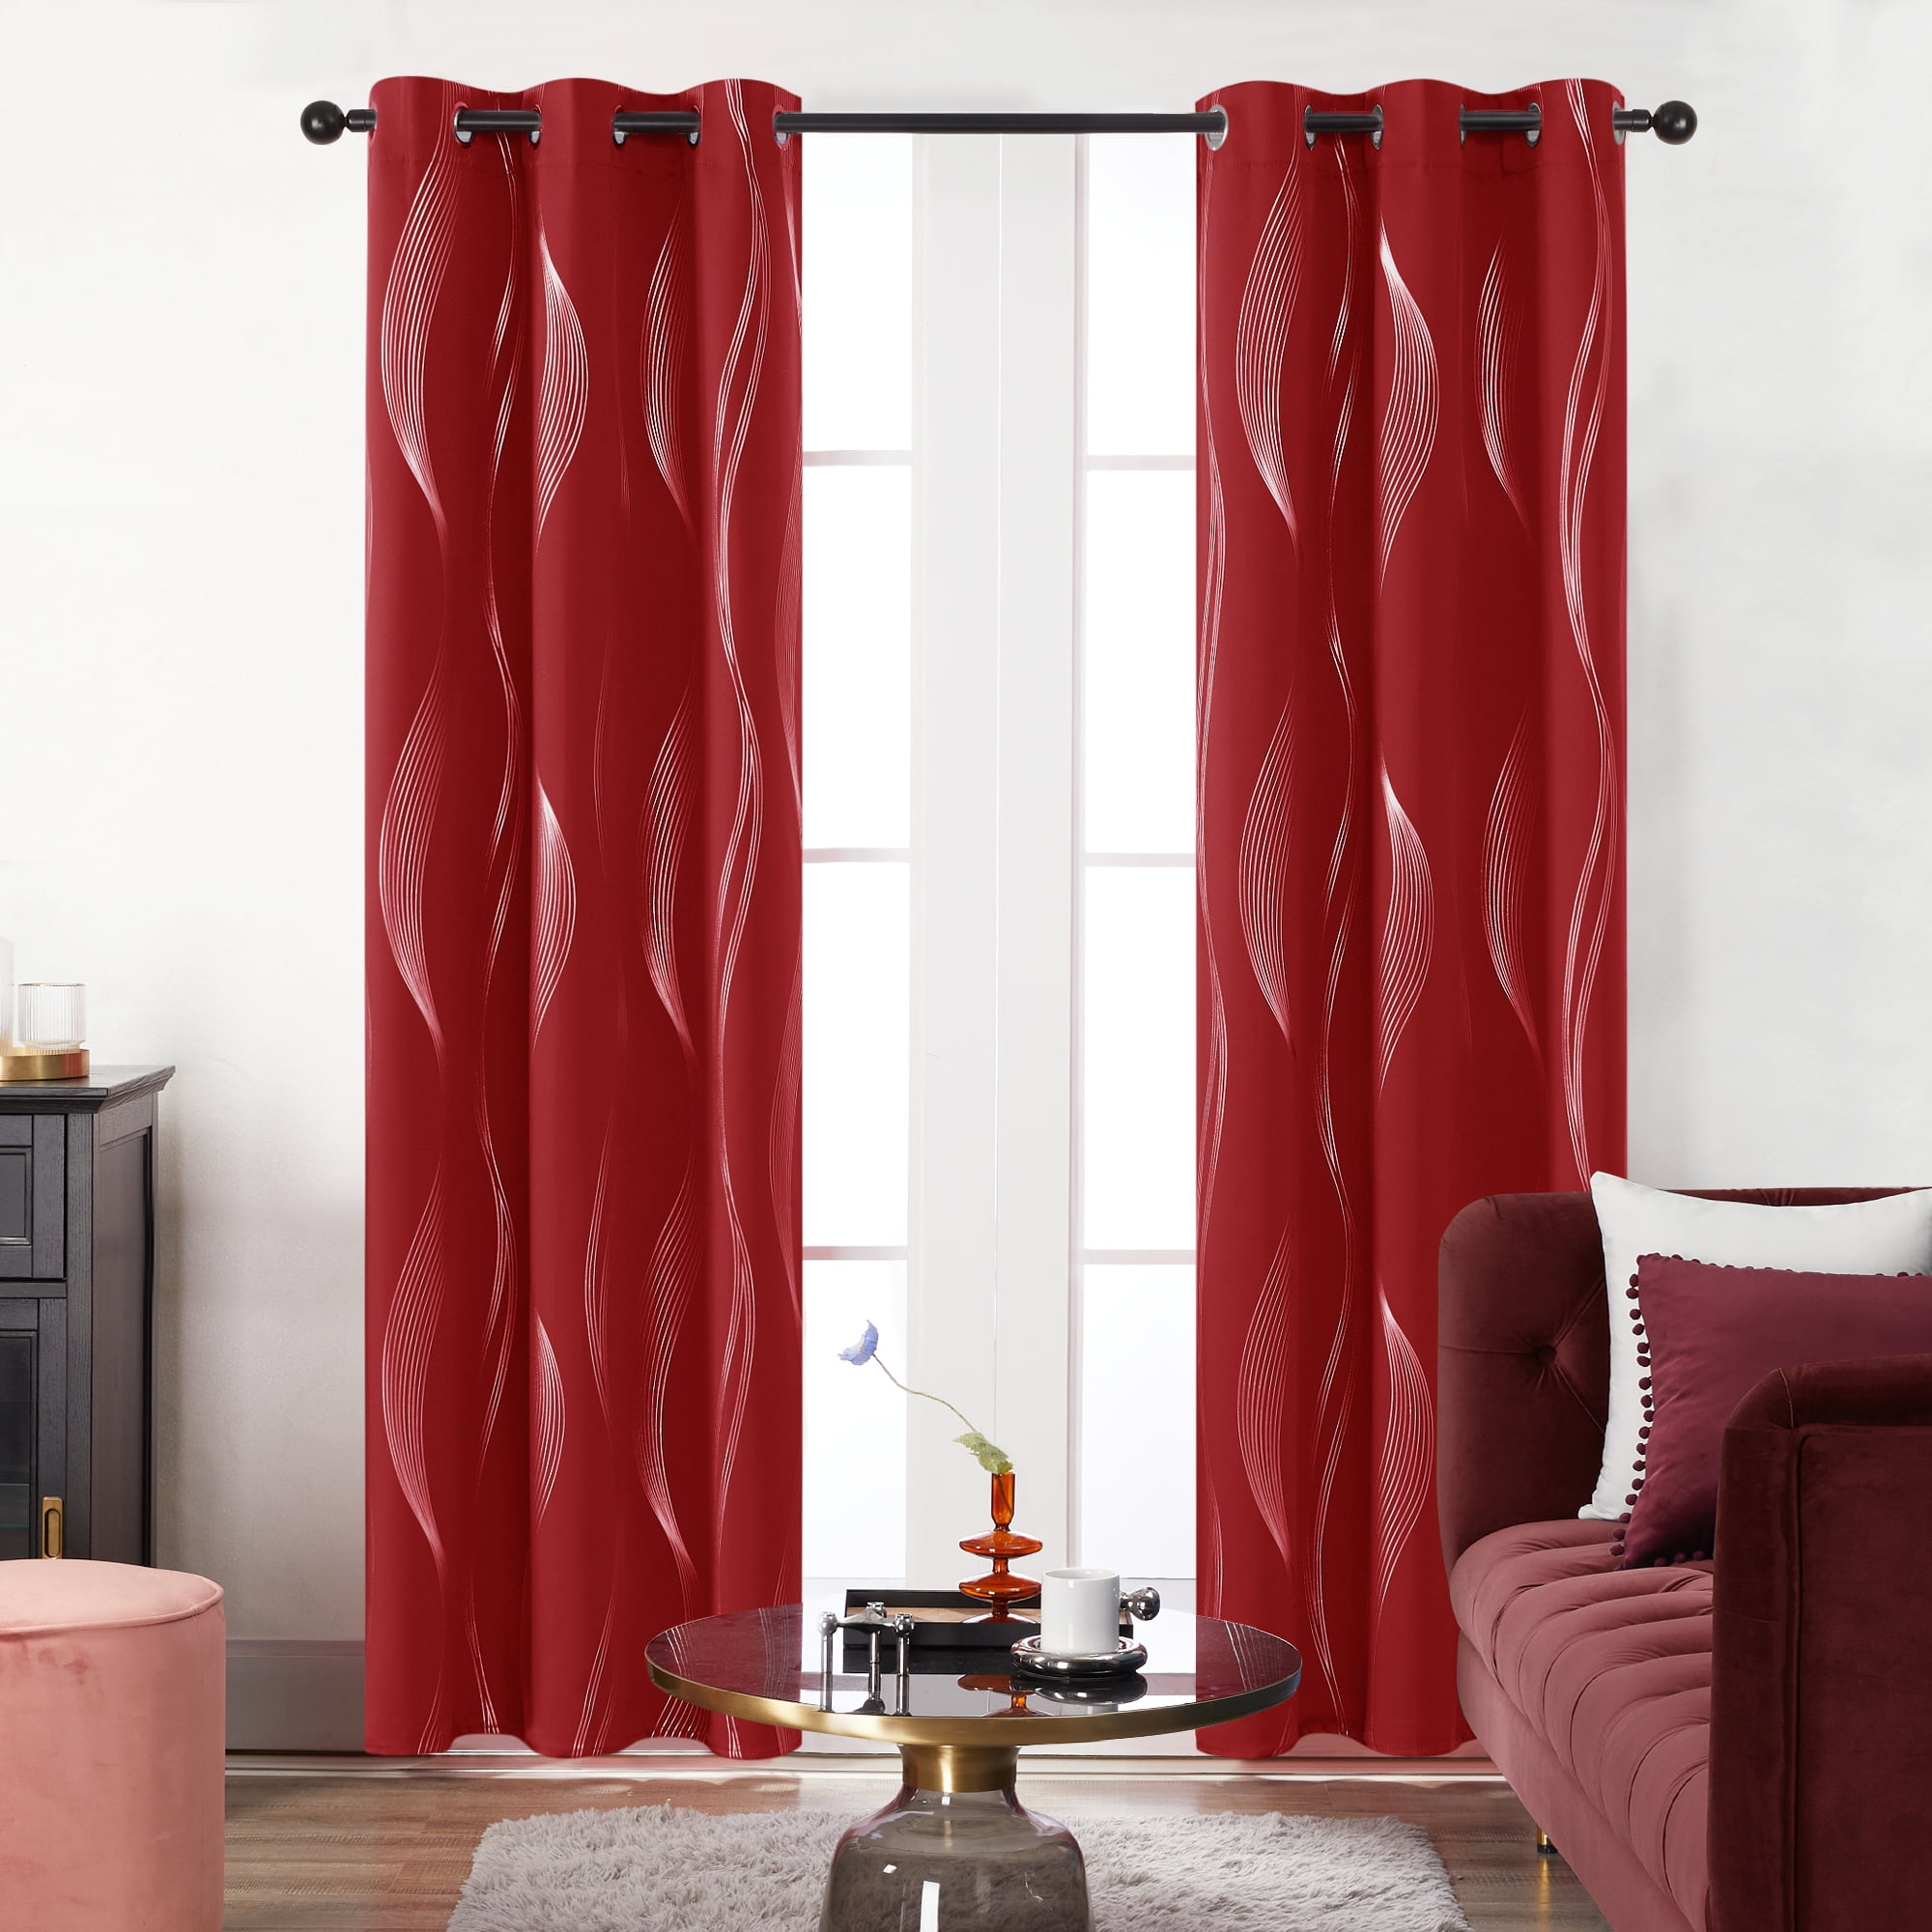 Print Polyester Curtains Bedroom Blackout Window Blinds Drapes Home Art Decor 